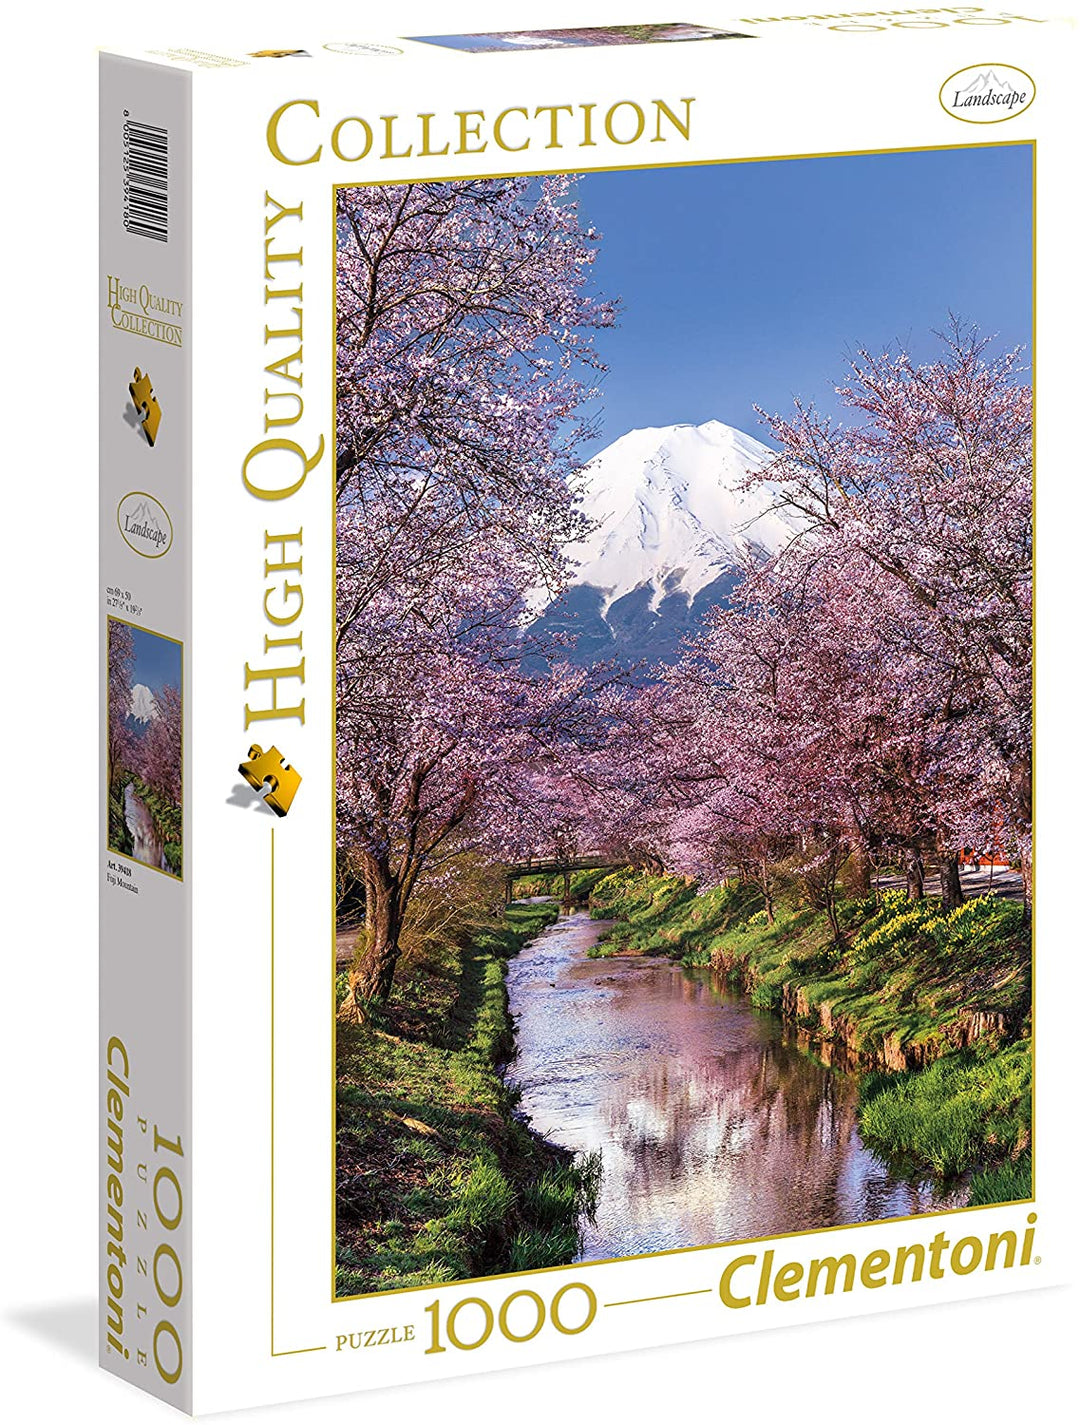 Clementoni 39418 - Collection-Fuji Mountain Puzzle for Adults and Children -1000 Pieces